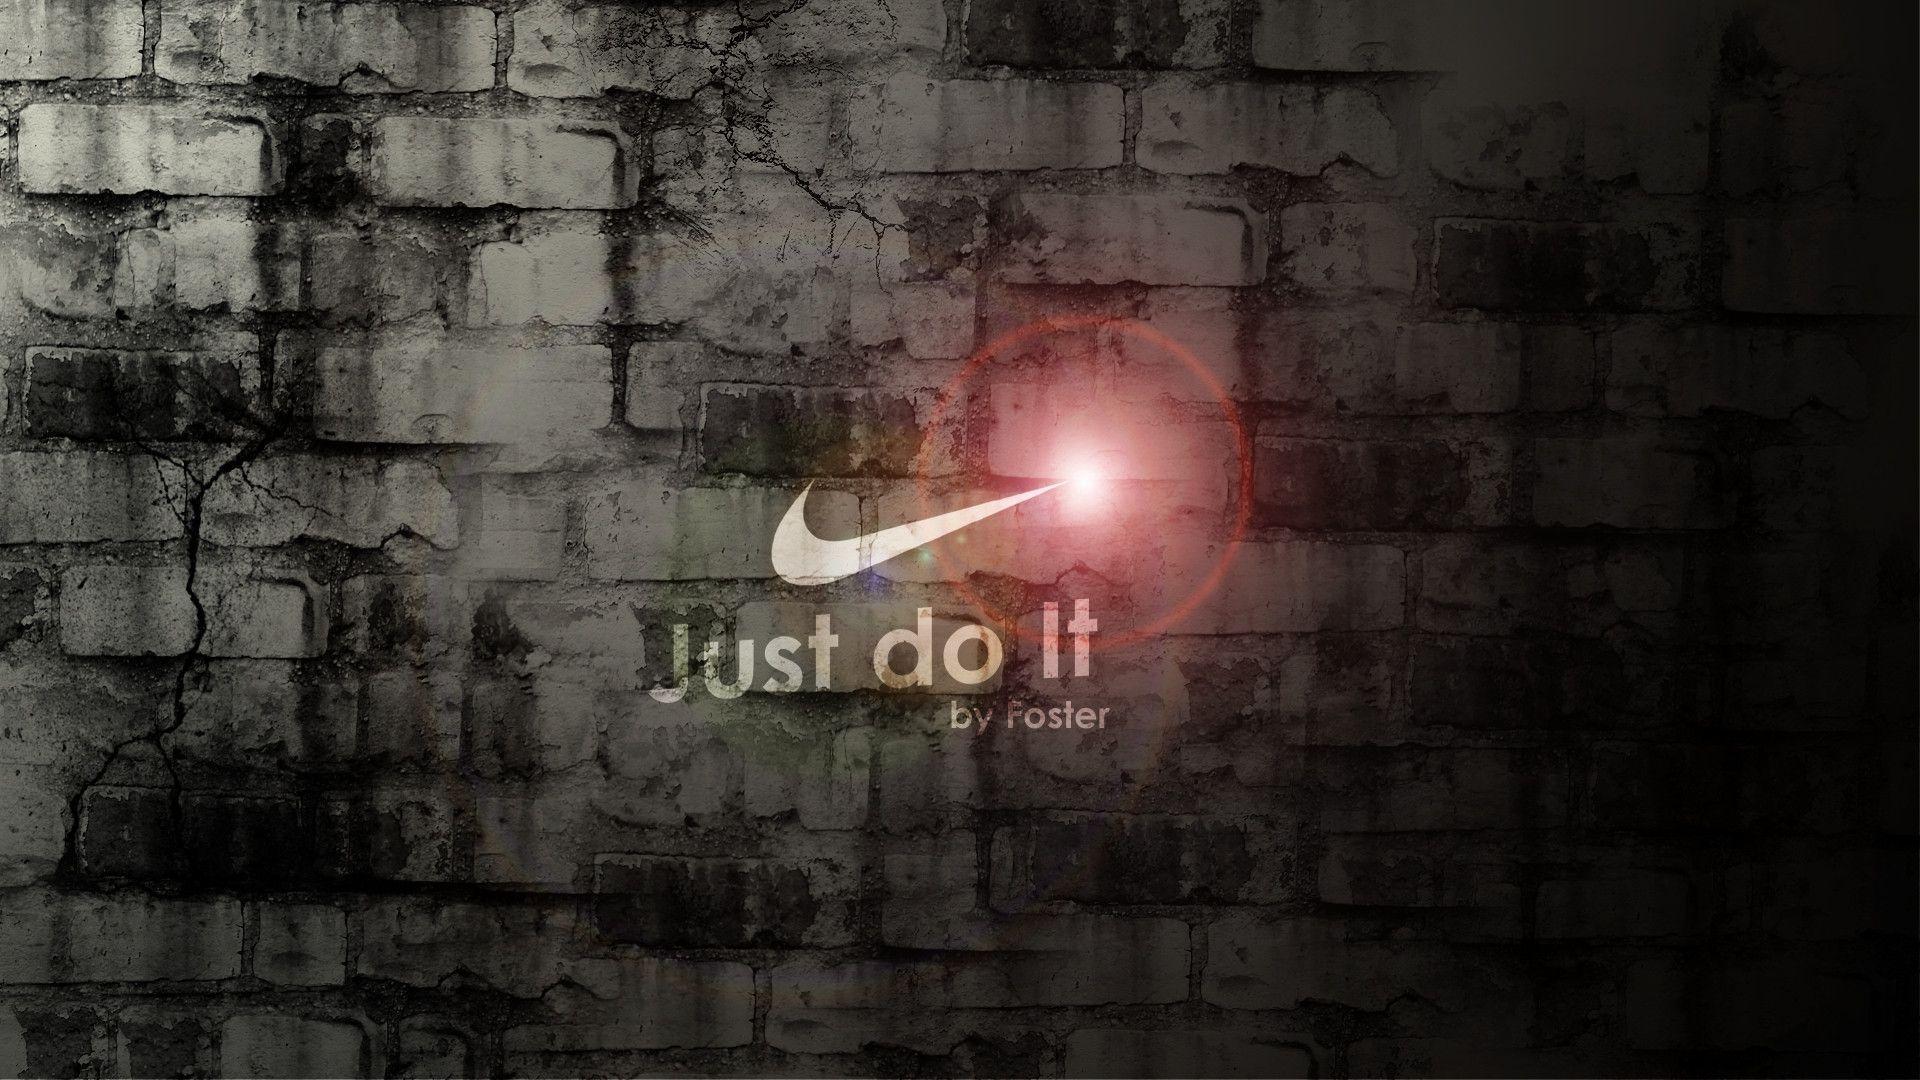 Trends For > Nike Wallpaper Just Do It